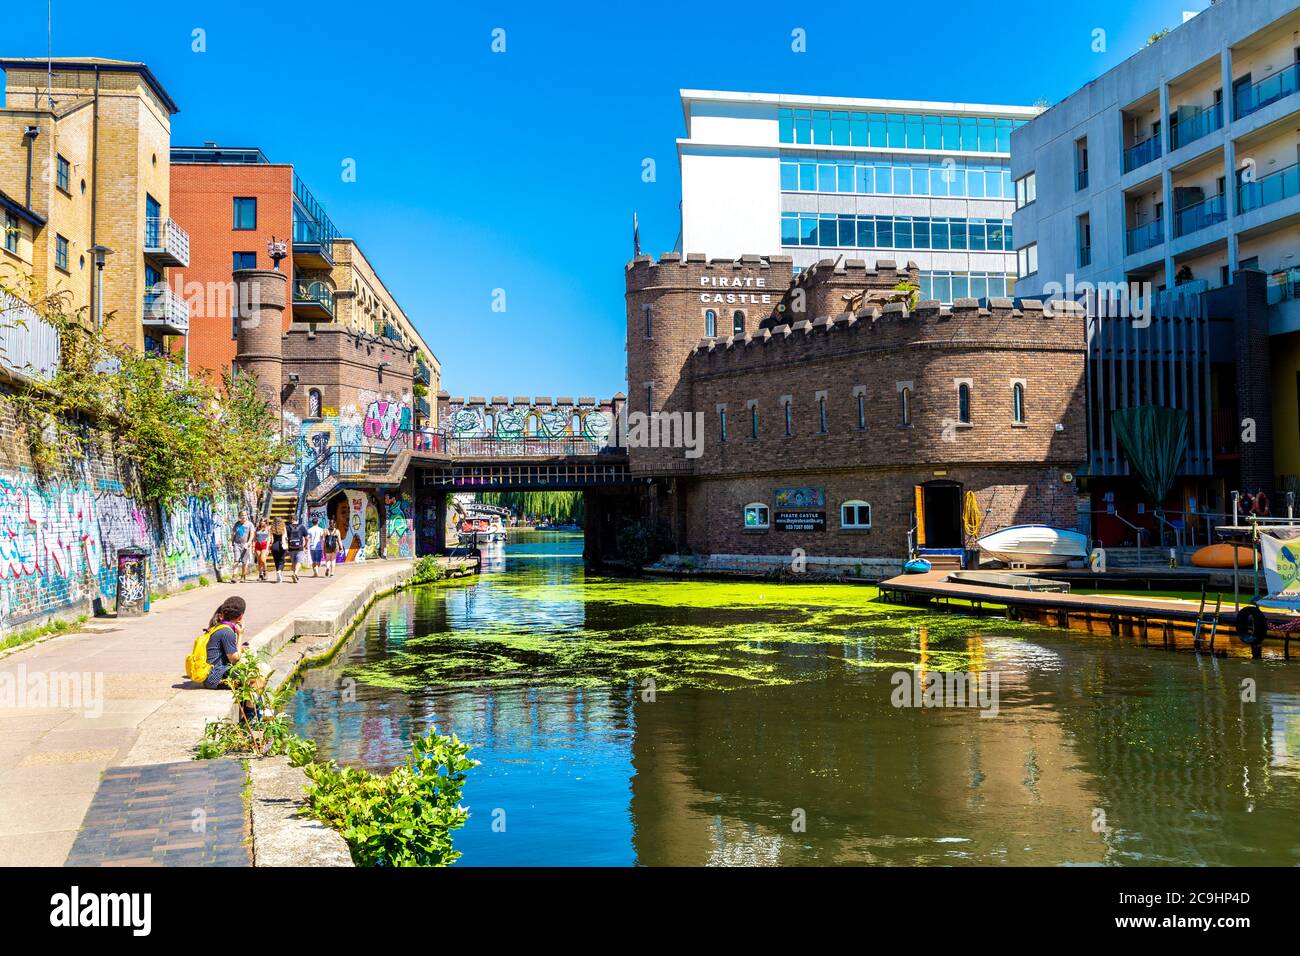 The Pirate Castle venue for water-based activites on Regents Canal, Camden, London, UK Stock Photo